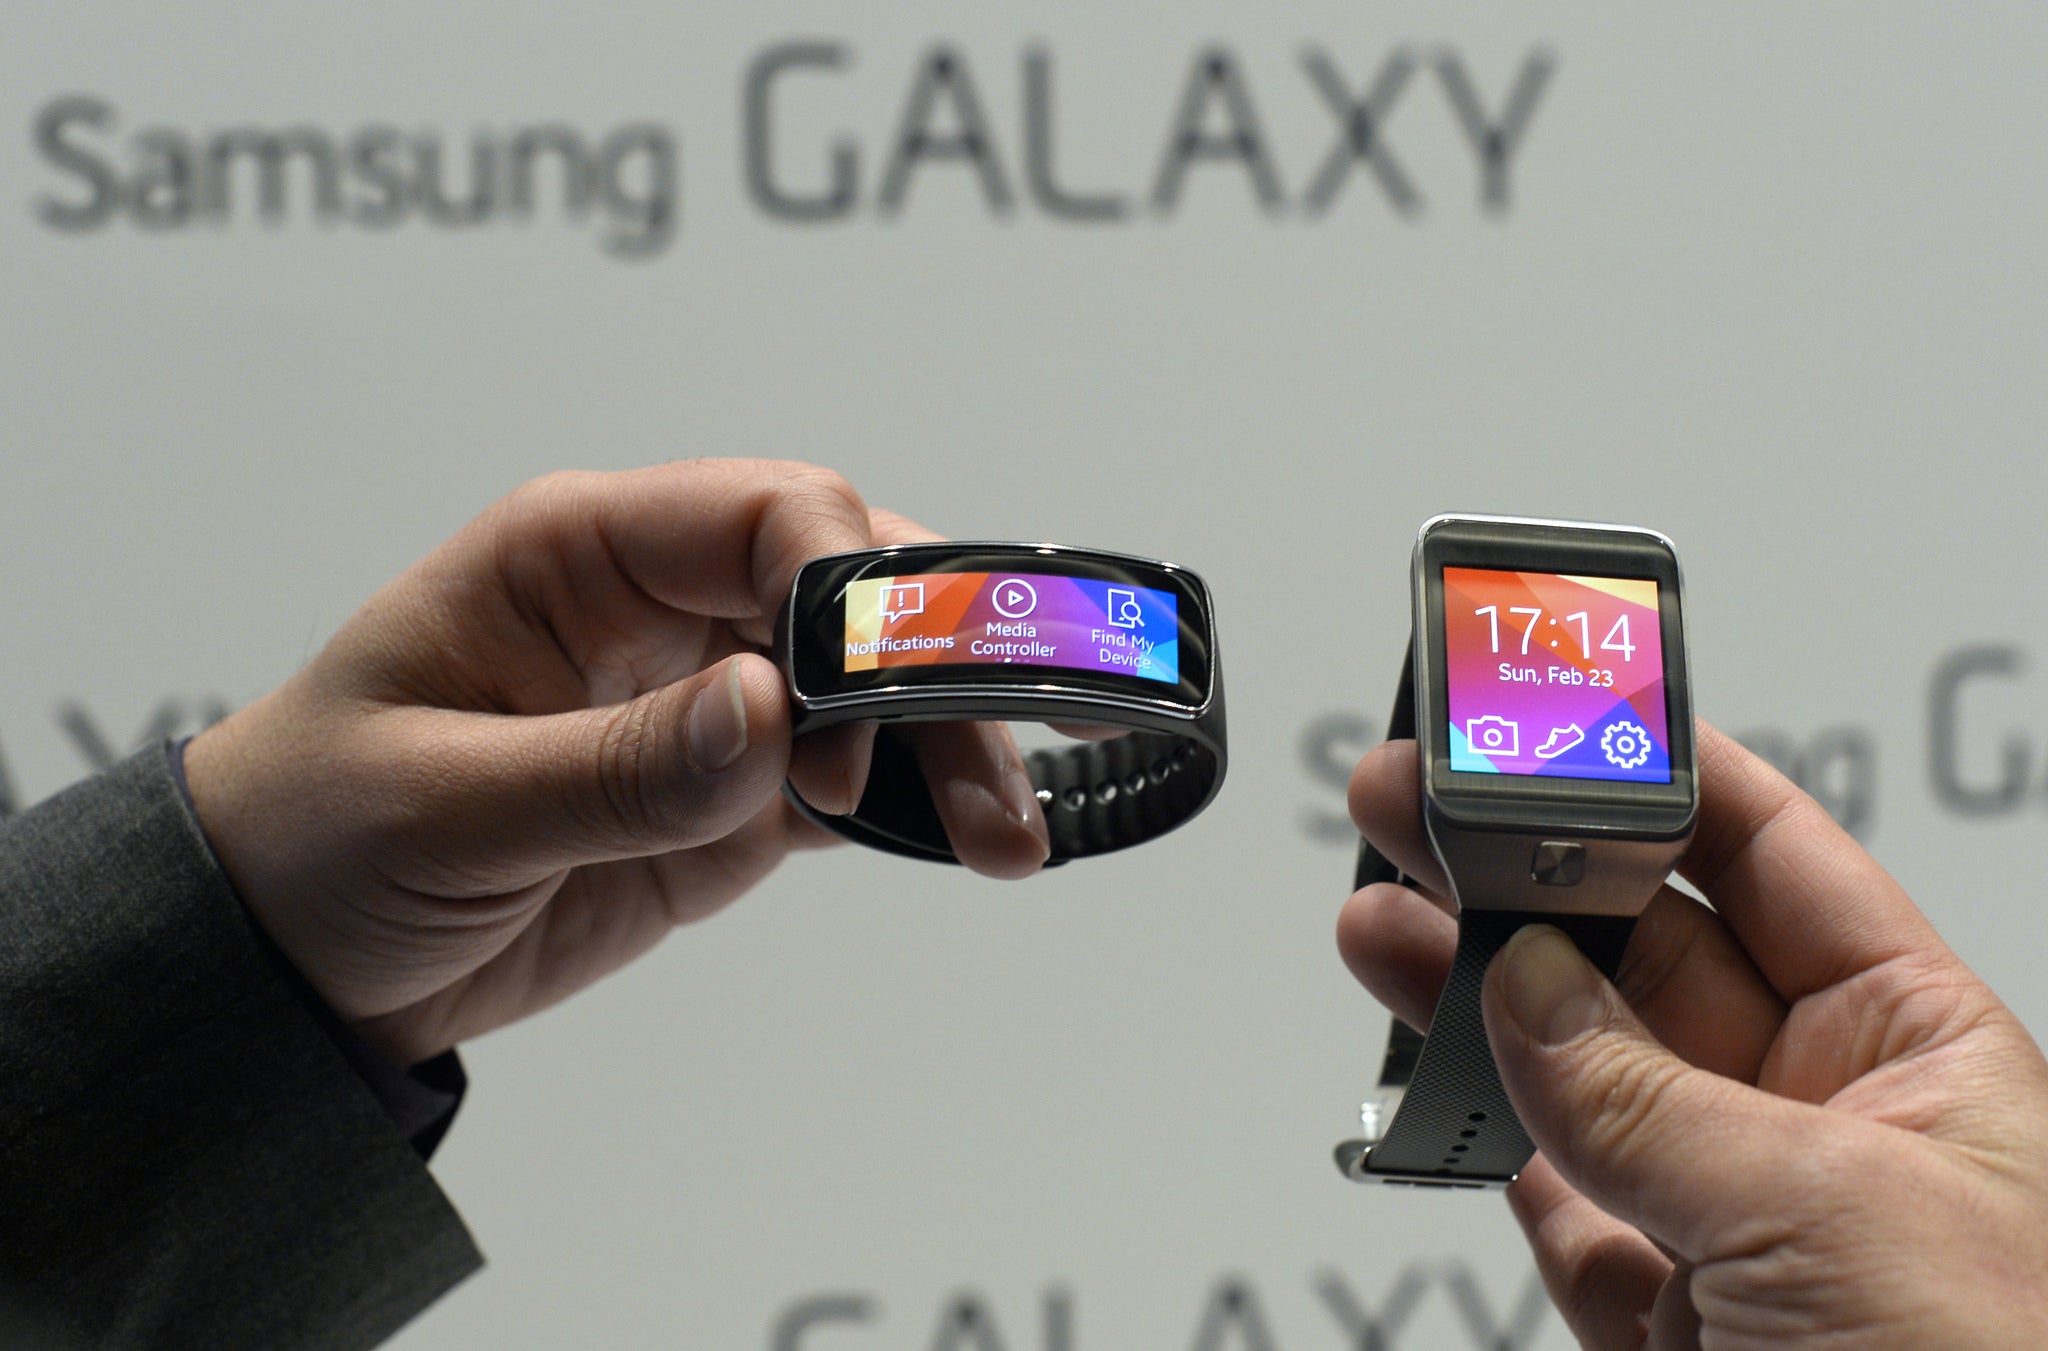 Samsung's Galaxy Gear and Gear Fit wearable devices - both of which run on Android